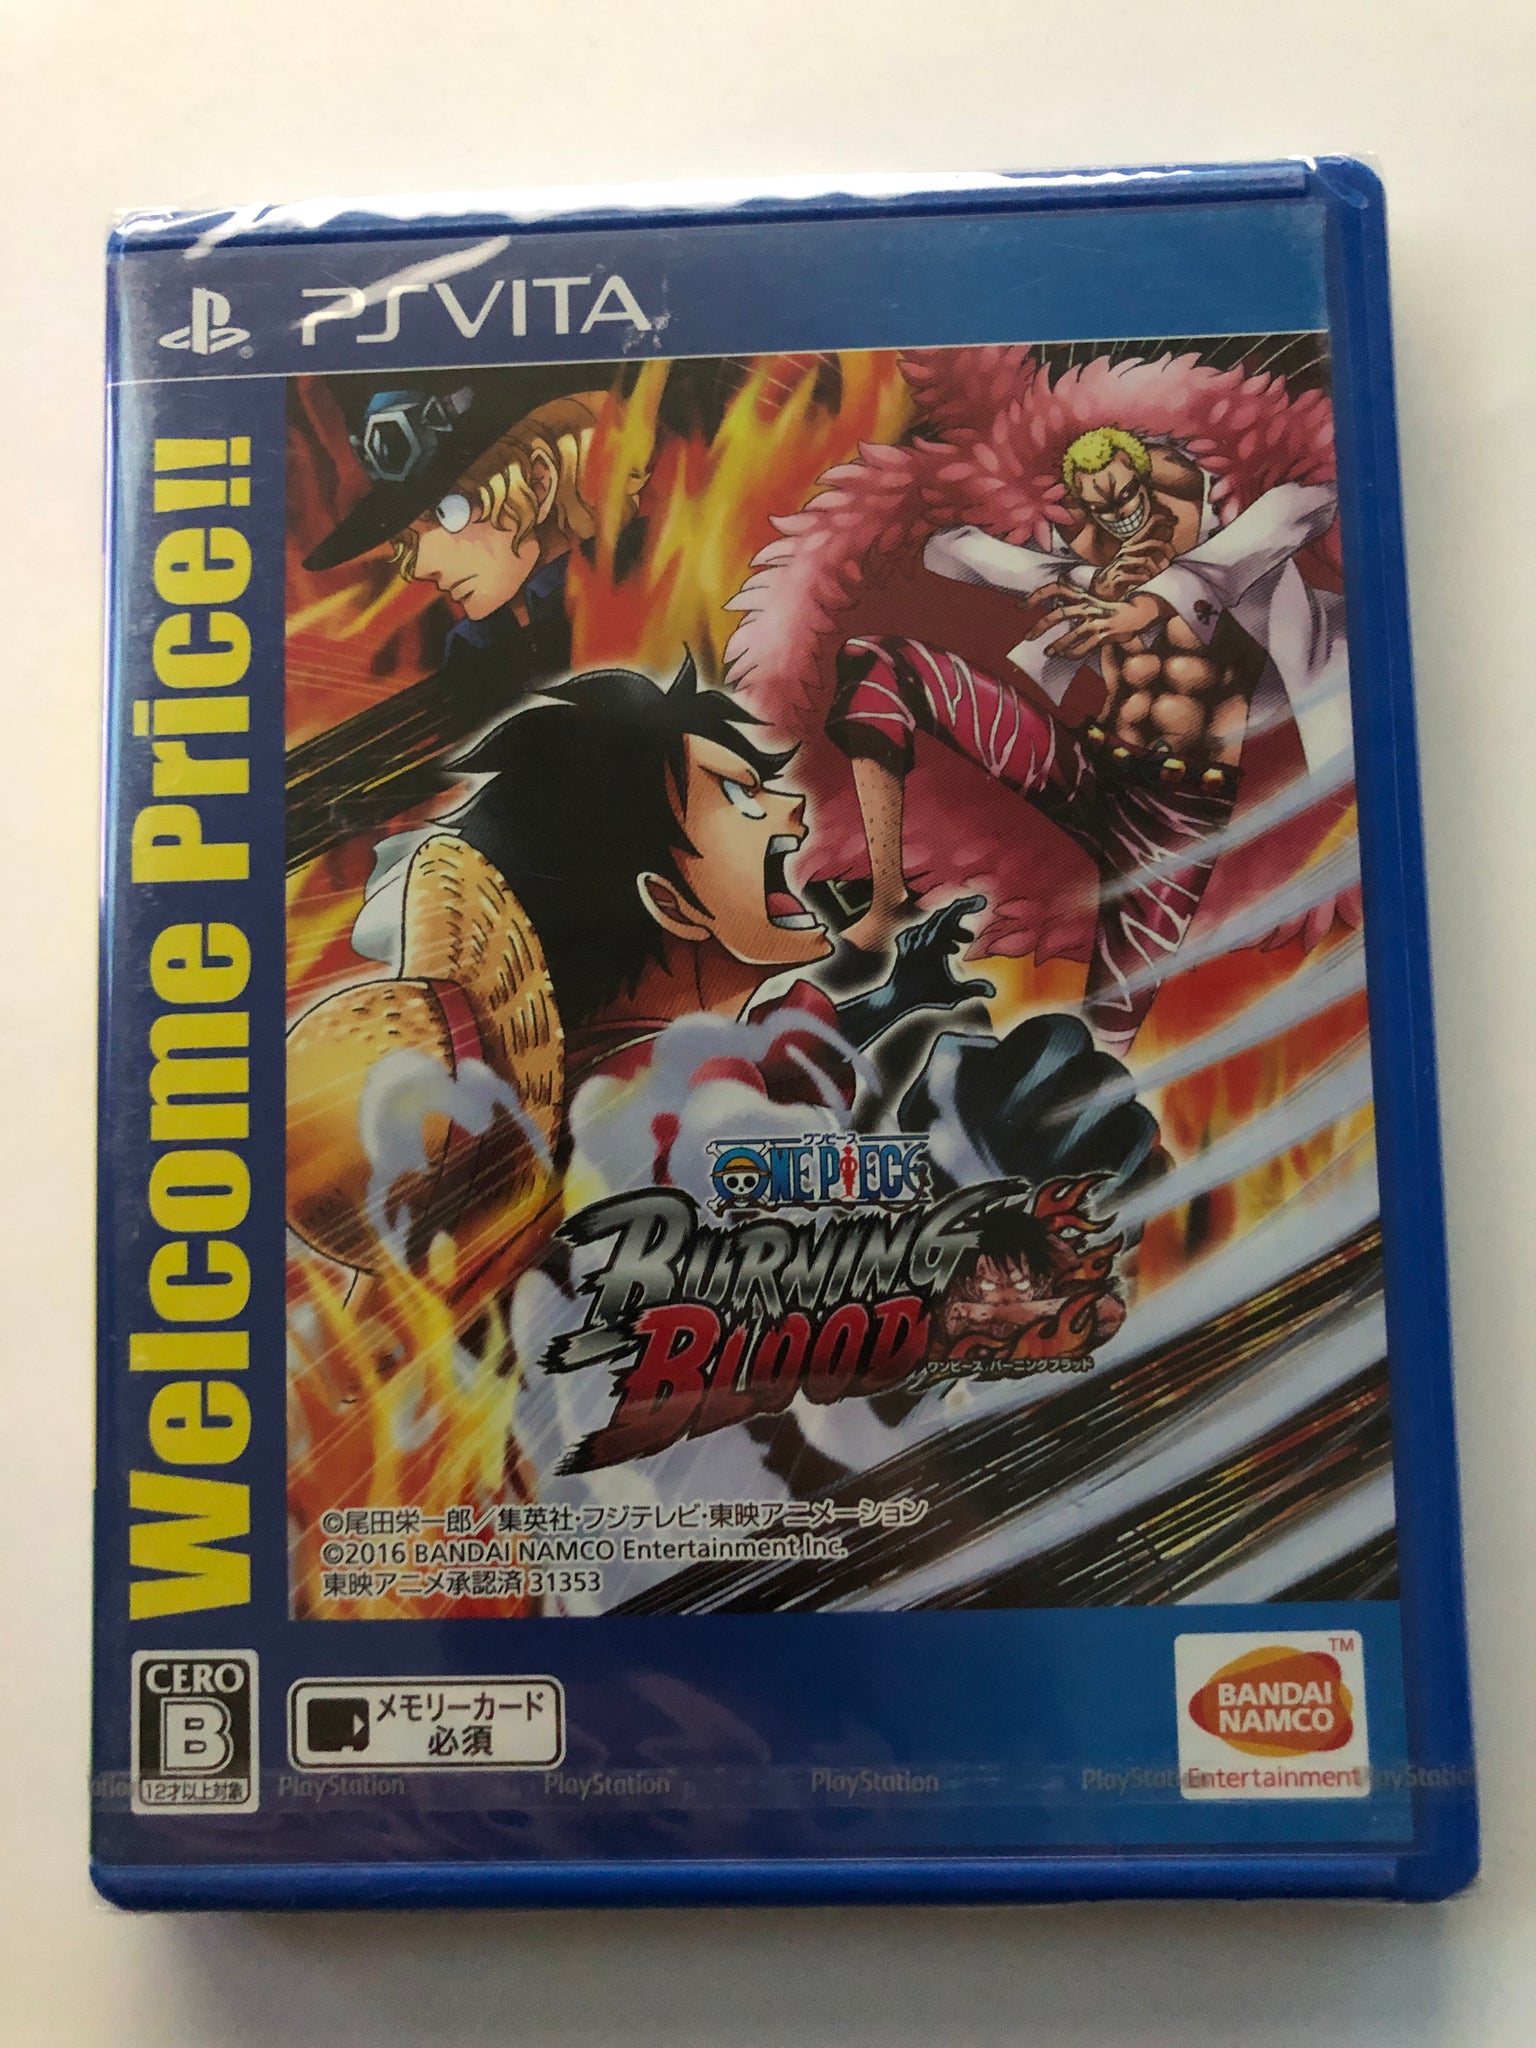 PS Vita "One Piece Burning Blood" Welcome Price – The Brewing Academy